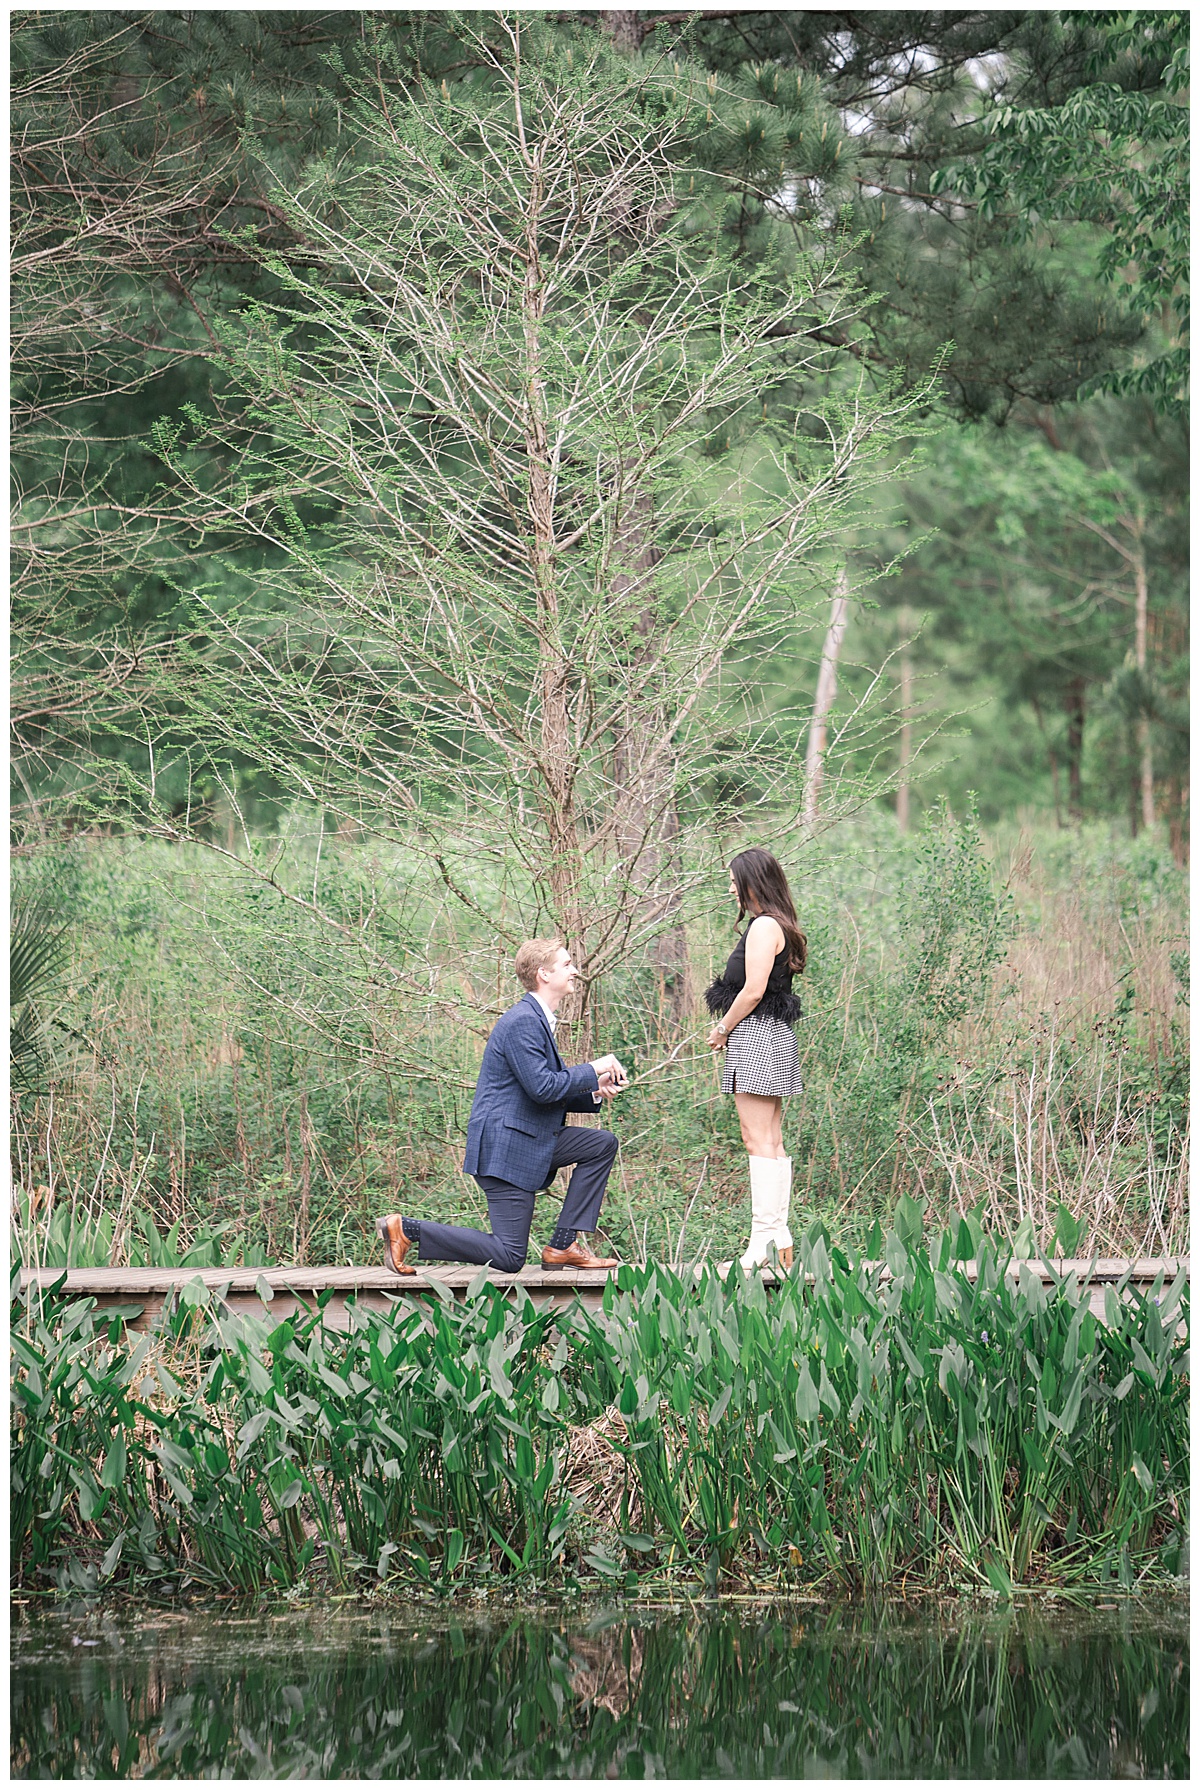 Guy down on one knee for Surprise Proposal at the Houston Arboretum